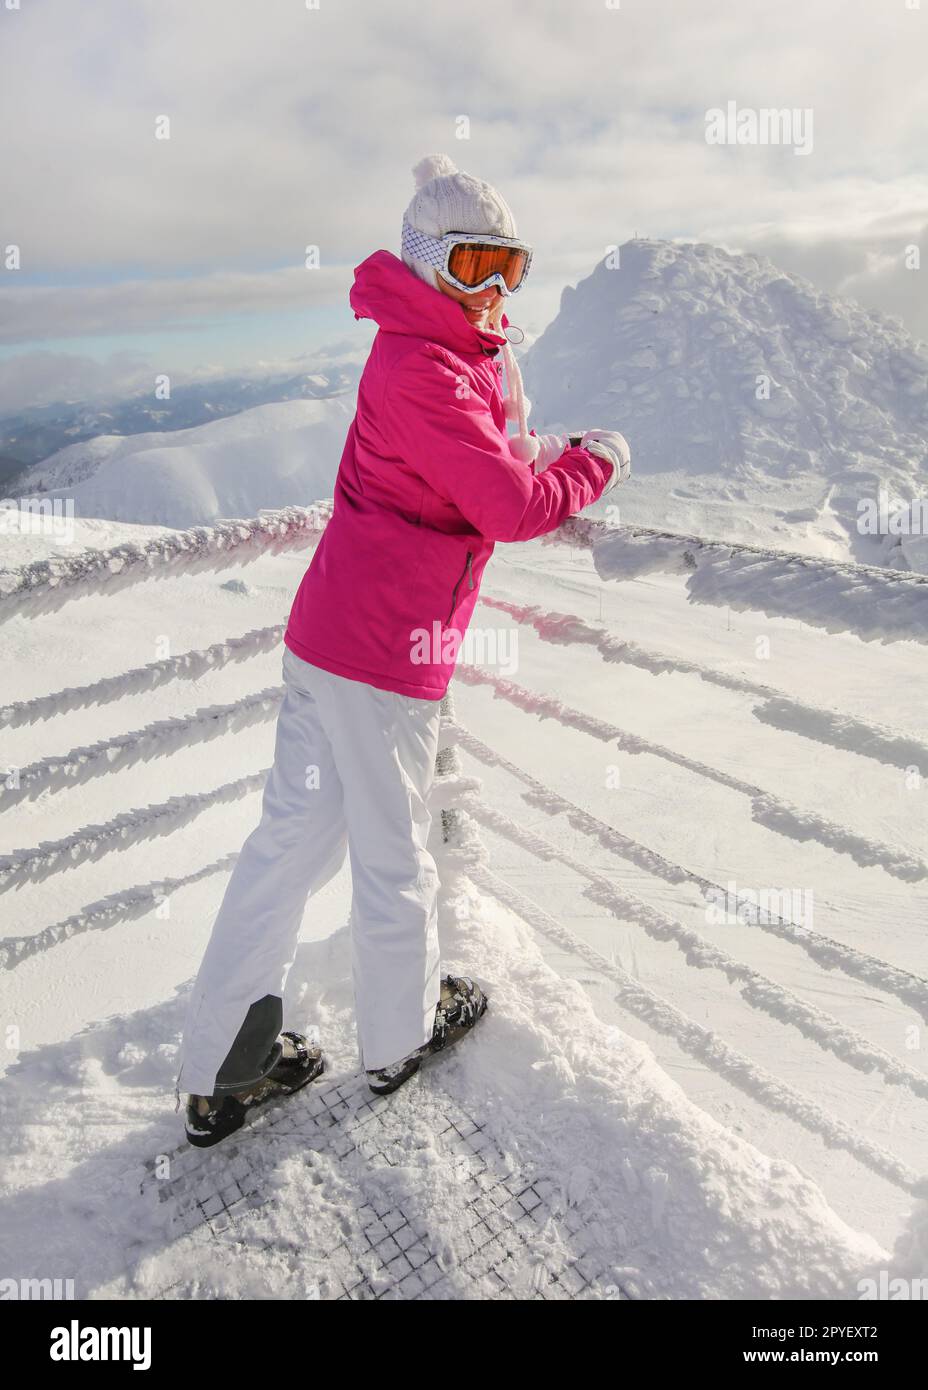 Women's Ski Apparel: What To Wear When Skiing – Snow Angel